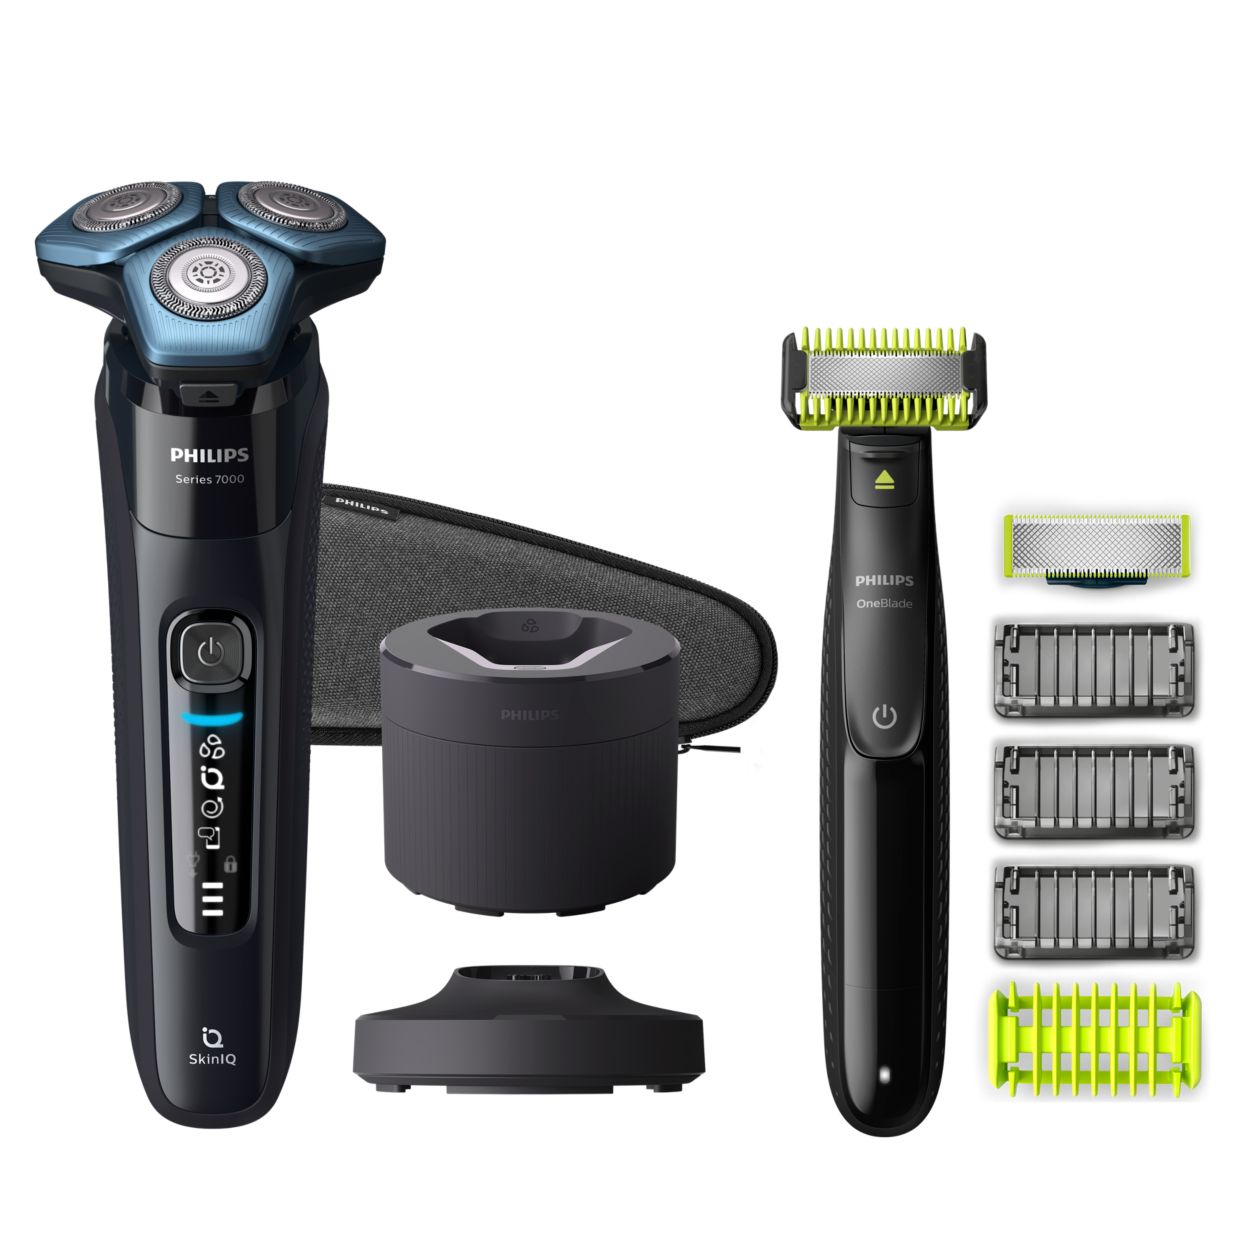 Shaver series 7000 Wet and Dry electric shaver S7783/78 | Philips